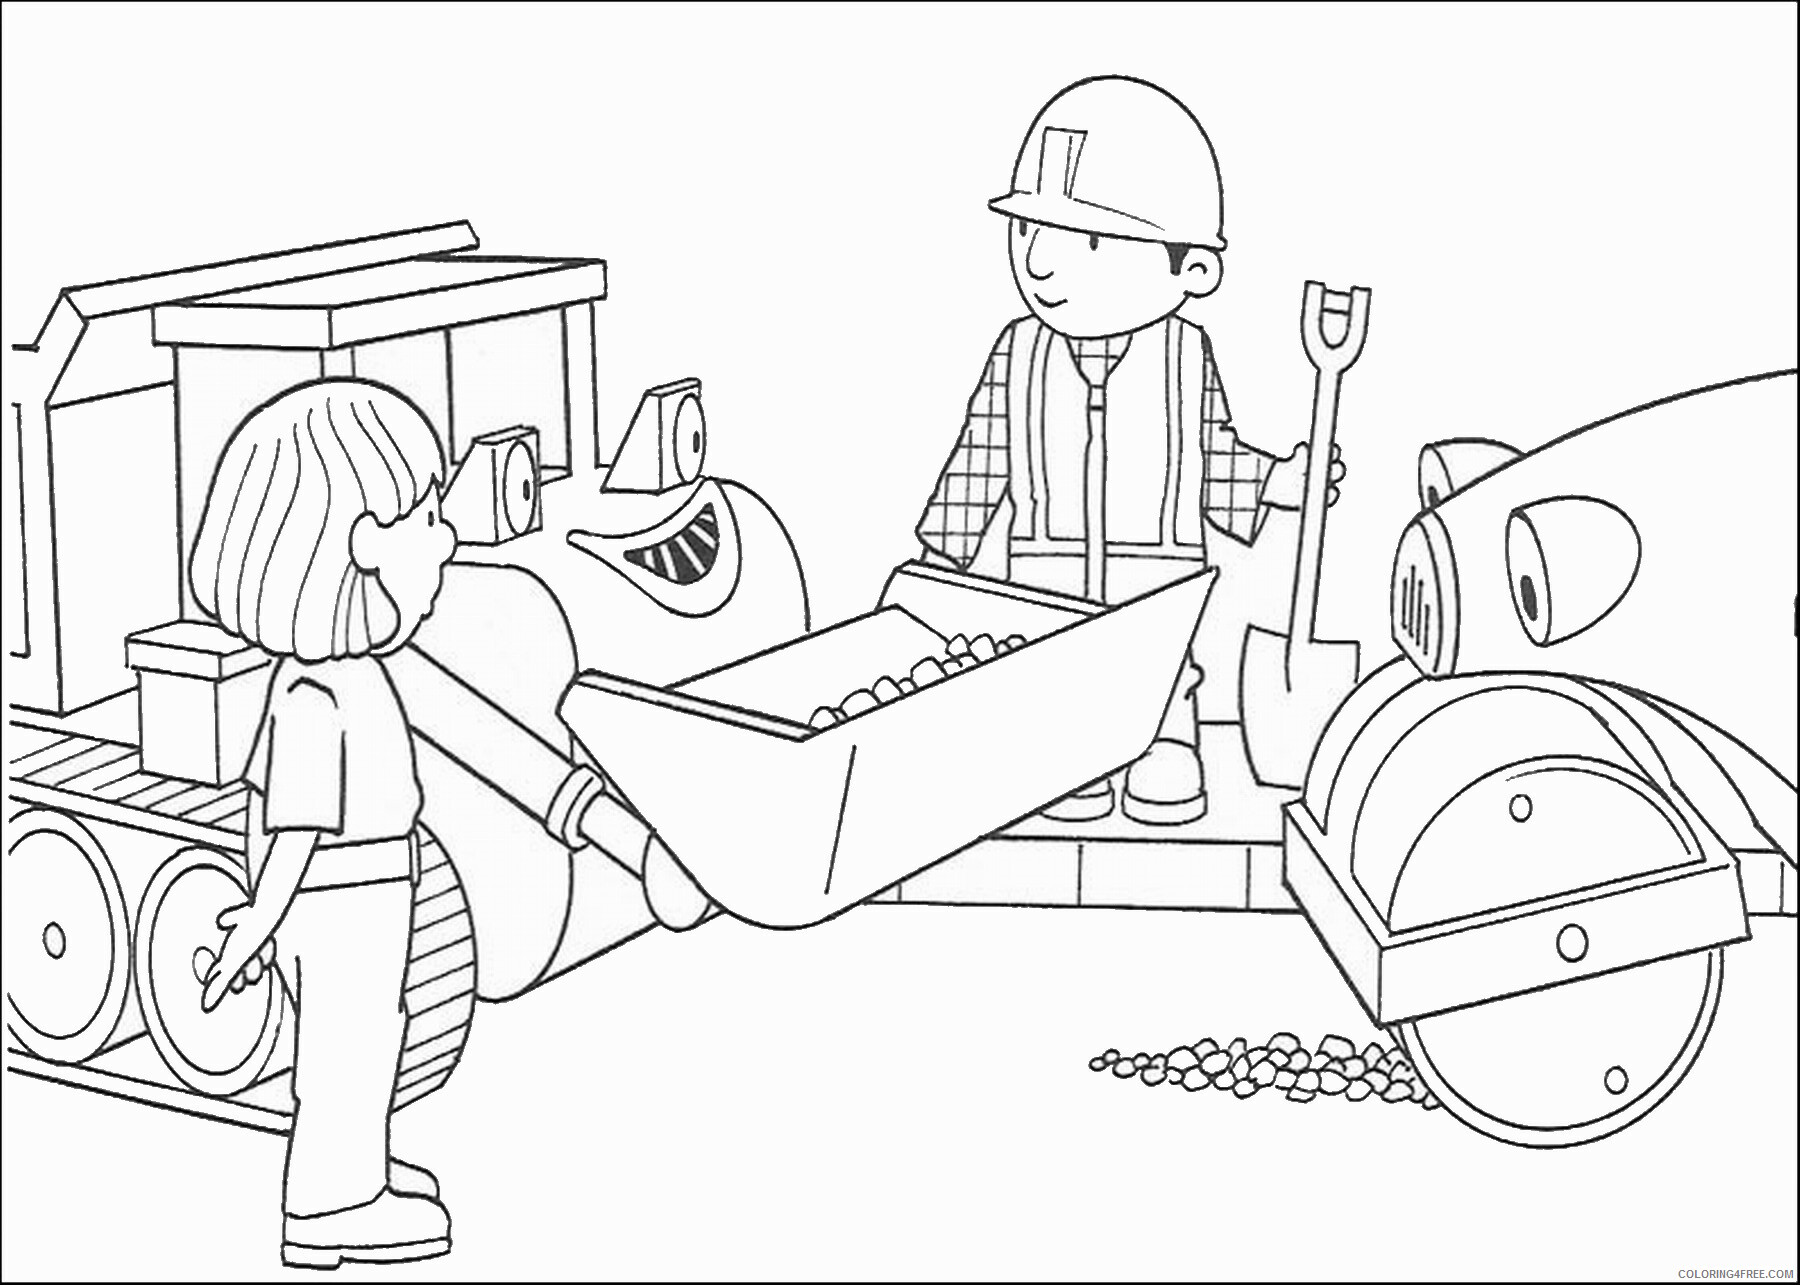 Bob the Builder Coloring Pages TV Film bob the builder_15 Printable 2020 00965 Coloring4free